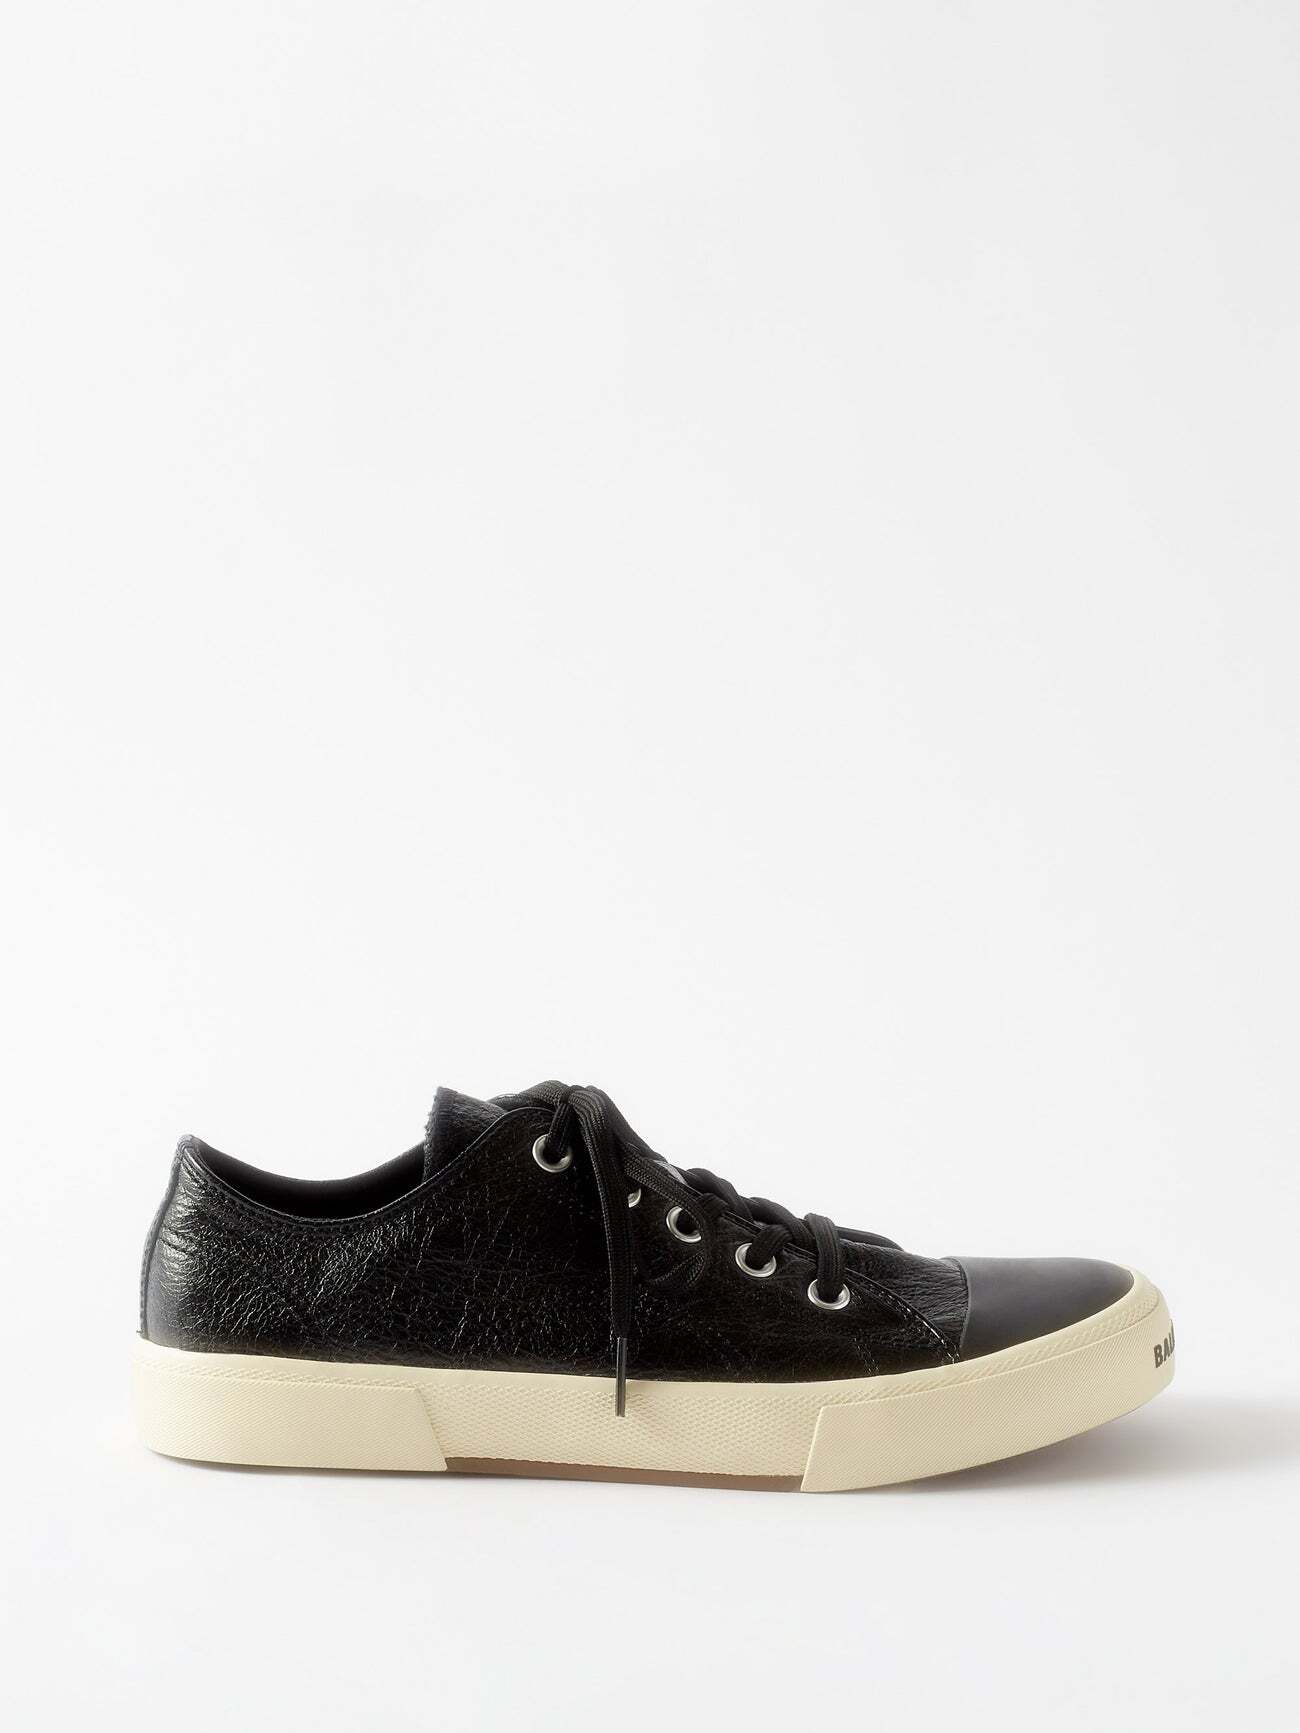 Balenciaga - Paris Crinkled Patent-leather Trainers - Womens - Black